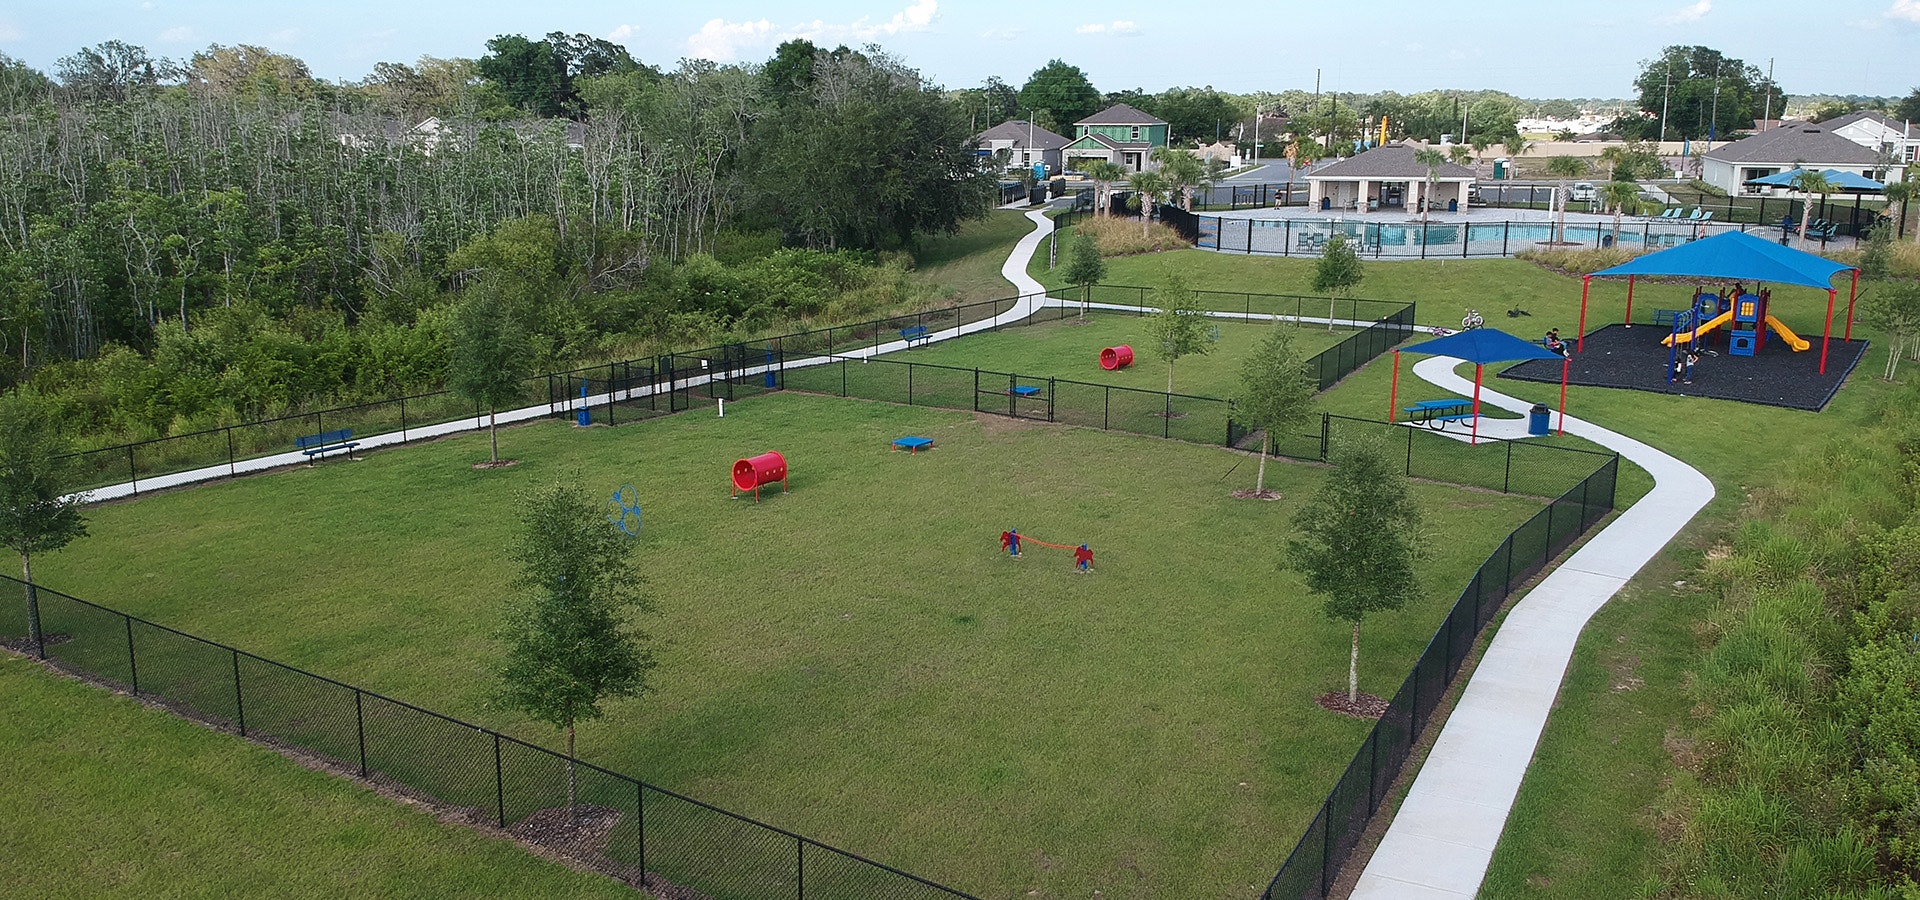 7 Benefits of Living at Hammock Reserve in Haines City, FL